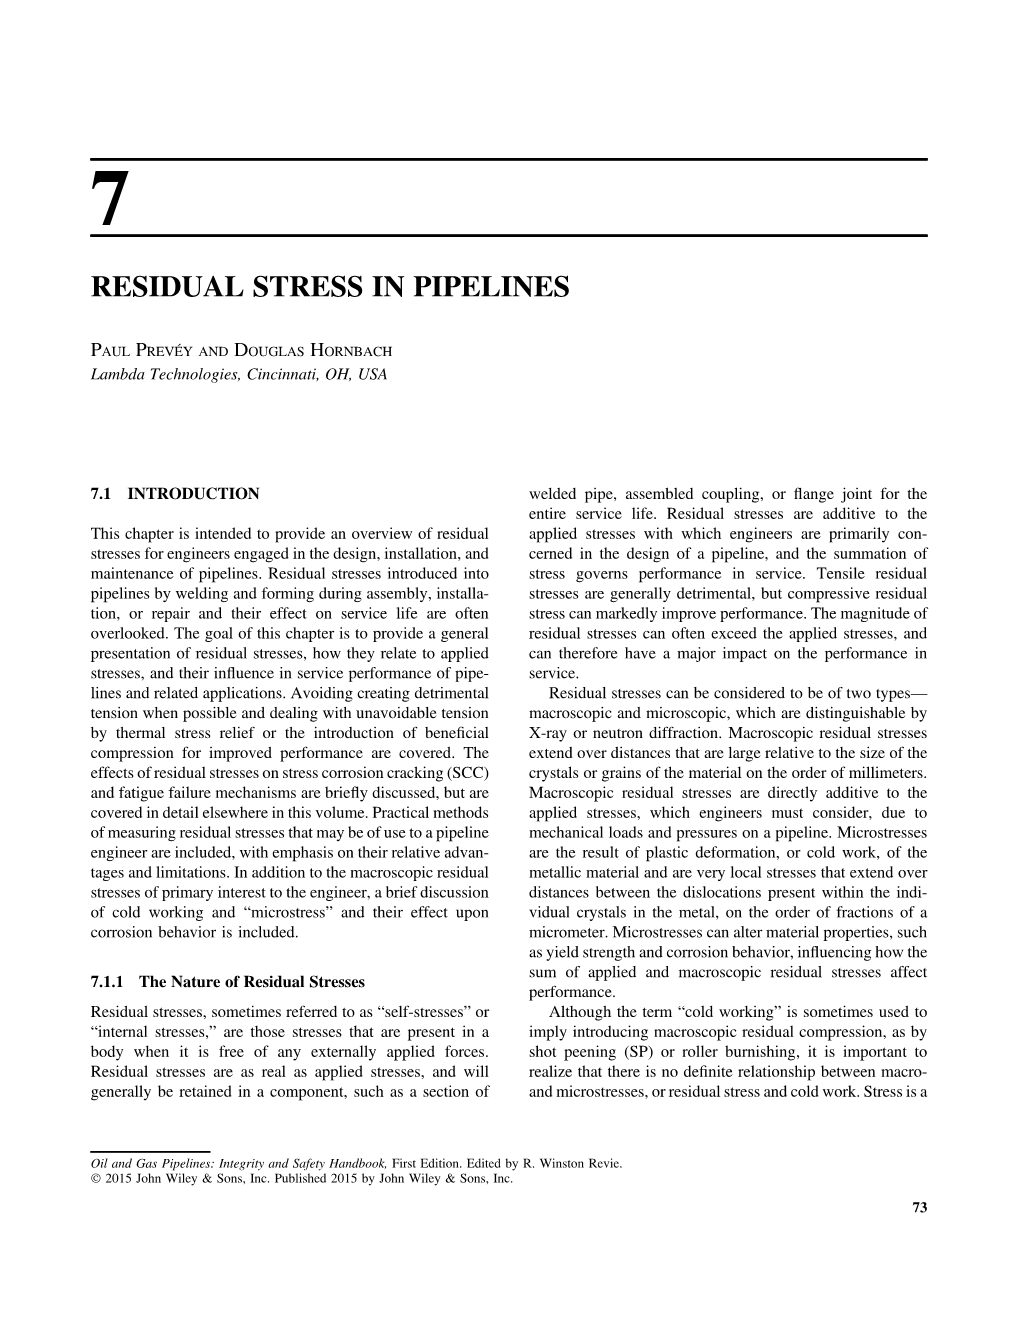 Residual Stress in Pipelines